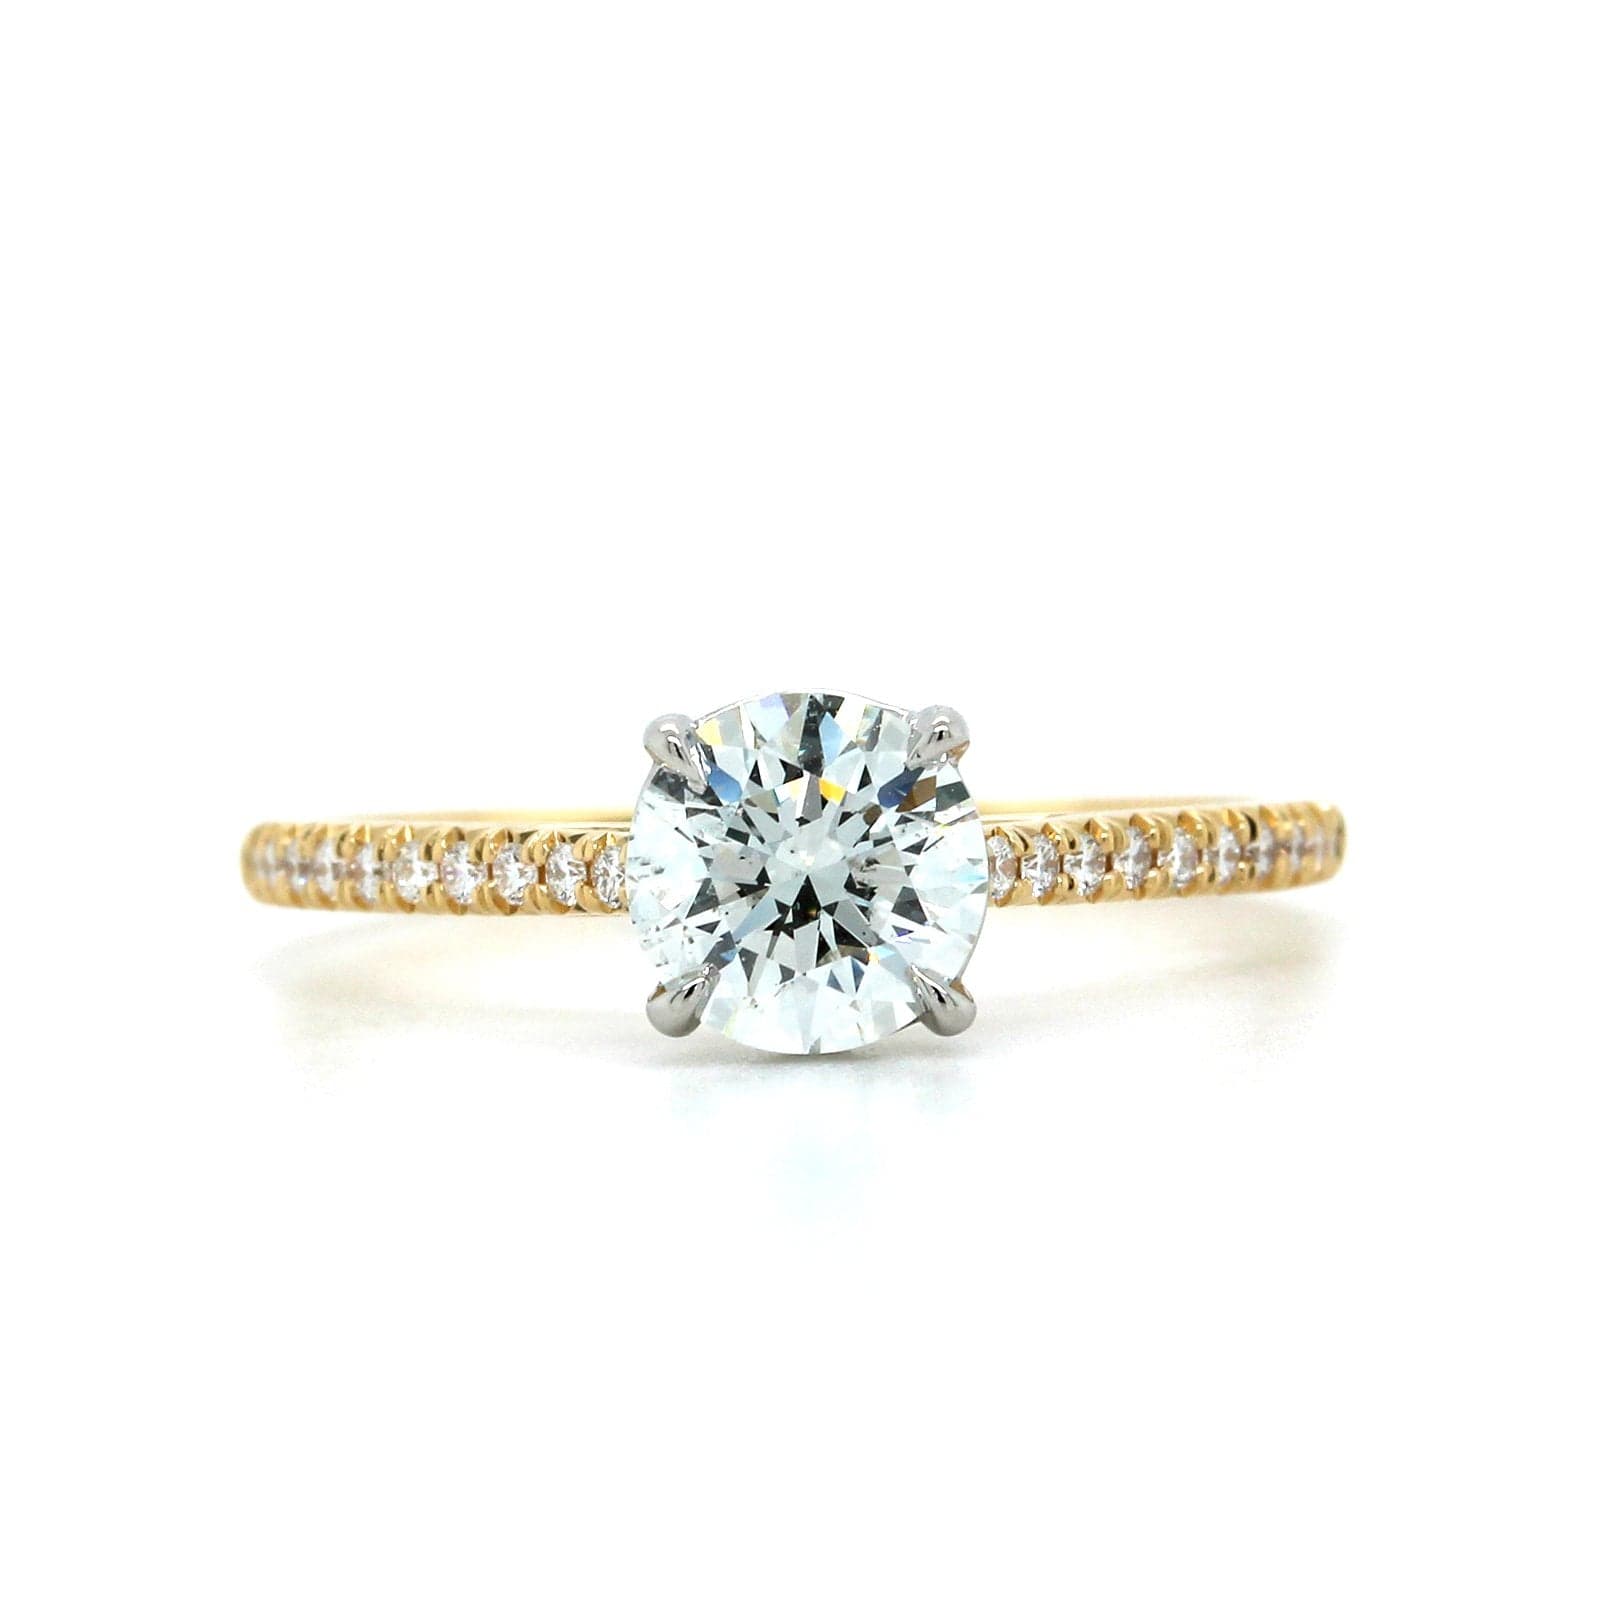 18K Yellow Gold Diamond with Diamond Sides Engagement Ring, 18K Yellow Gold, Long's Jewelers